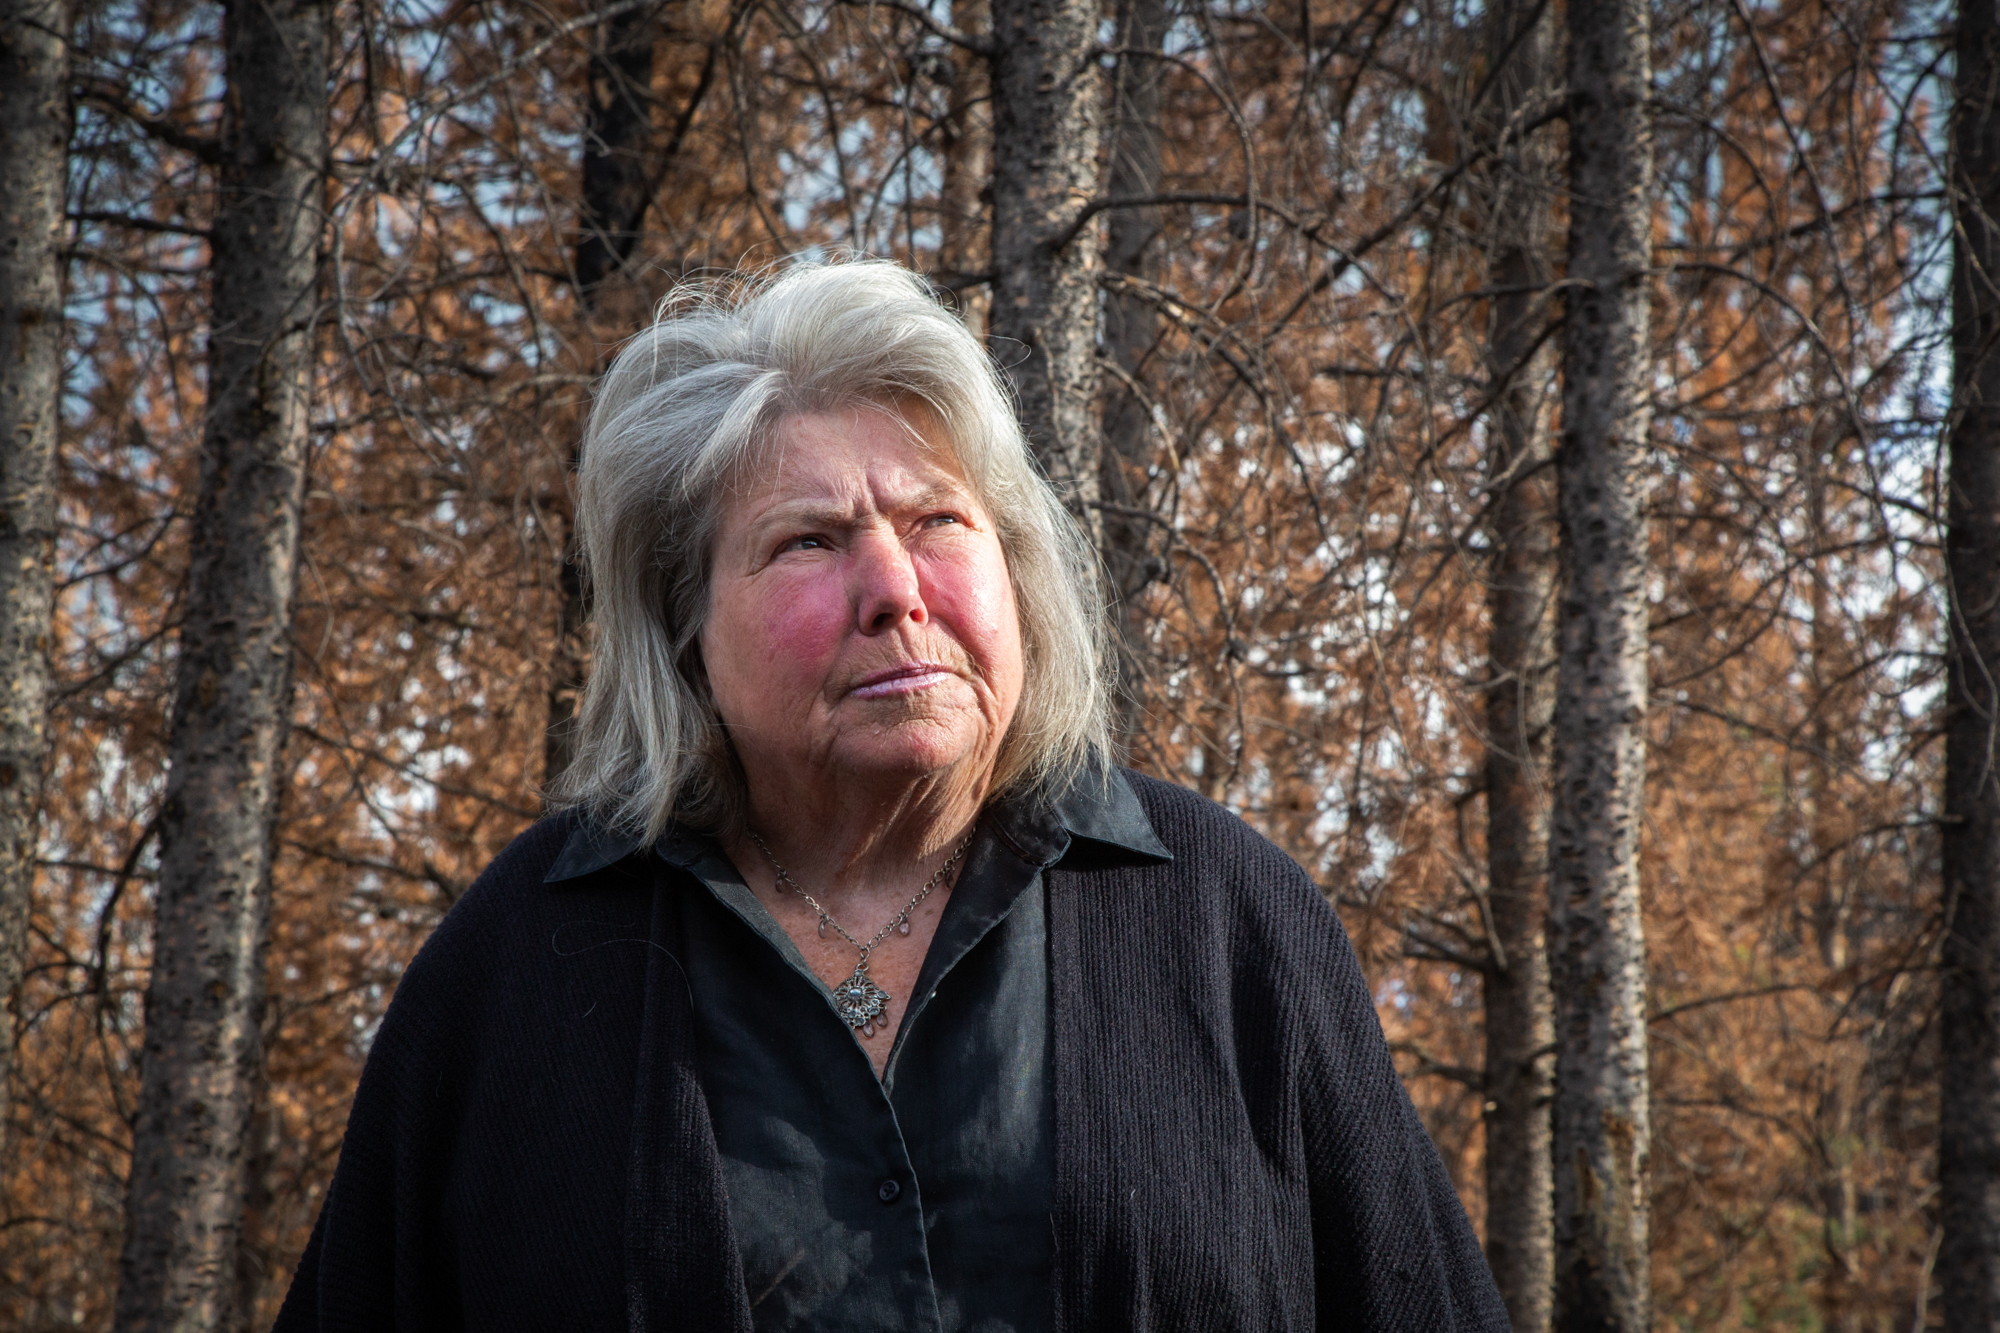 Marlene “Lanie” Beebe - Marlene “Lanie” Beebe, who lives in Hoback Ranches, Wyoming, lost her home and a shed in the 2018 Roosevelt Fire. Beebe lived out of her truck until a neighbor bought her a trailer to place on her property. Beebe is a potter and artist, and the fire destroyed her journals and art collections. (Drew Hutchinson/News21)